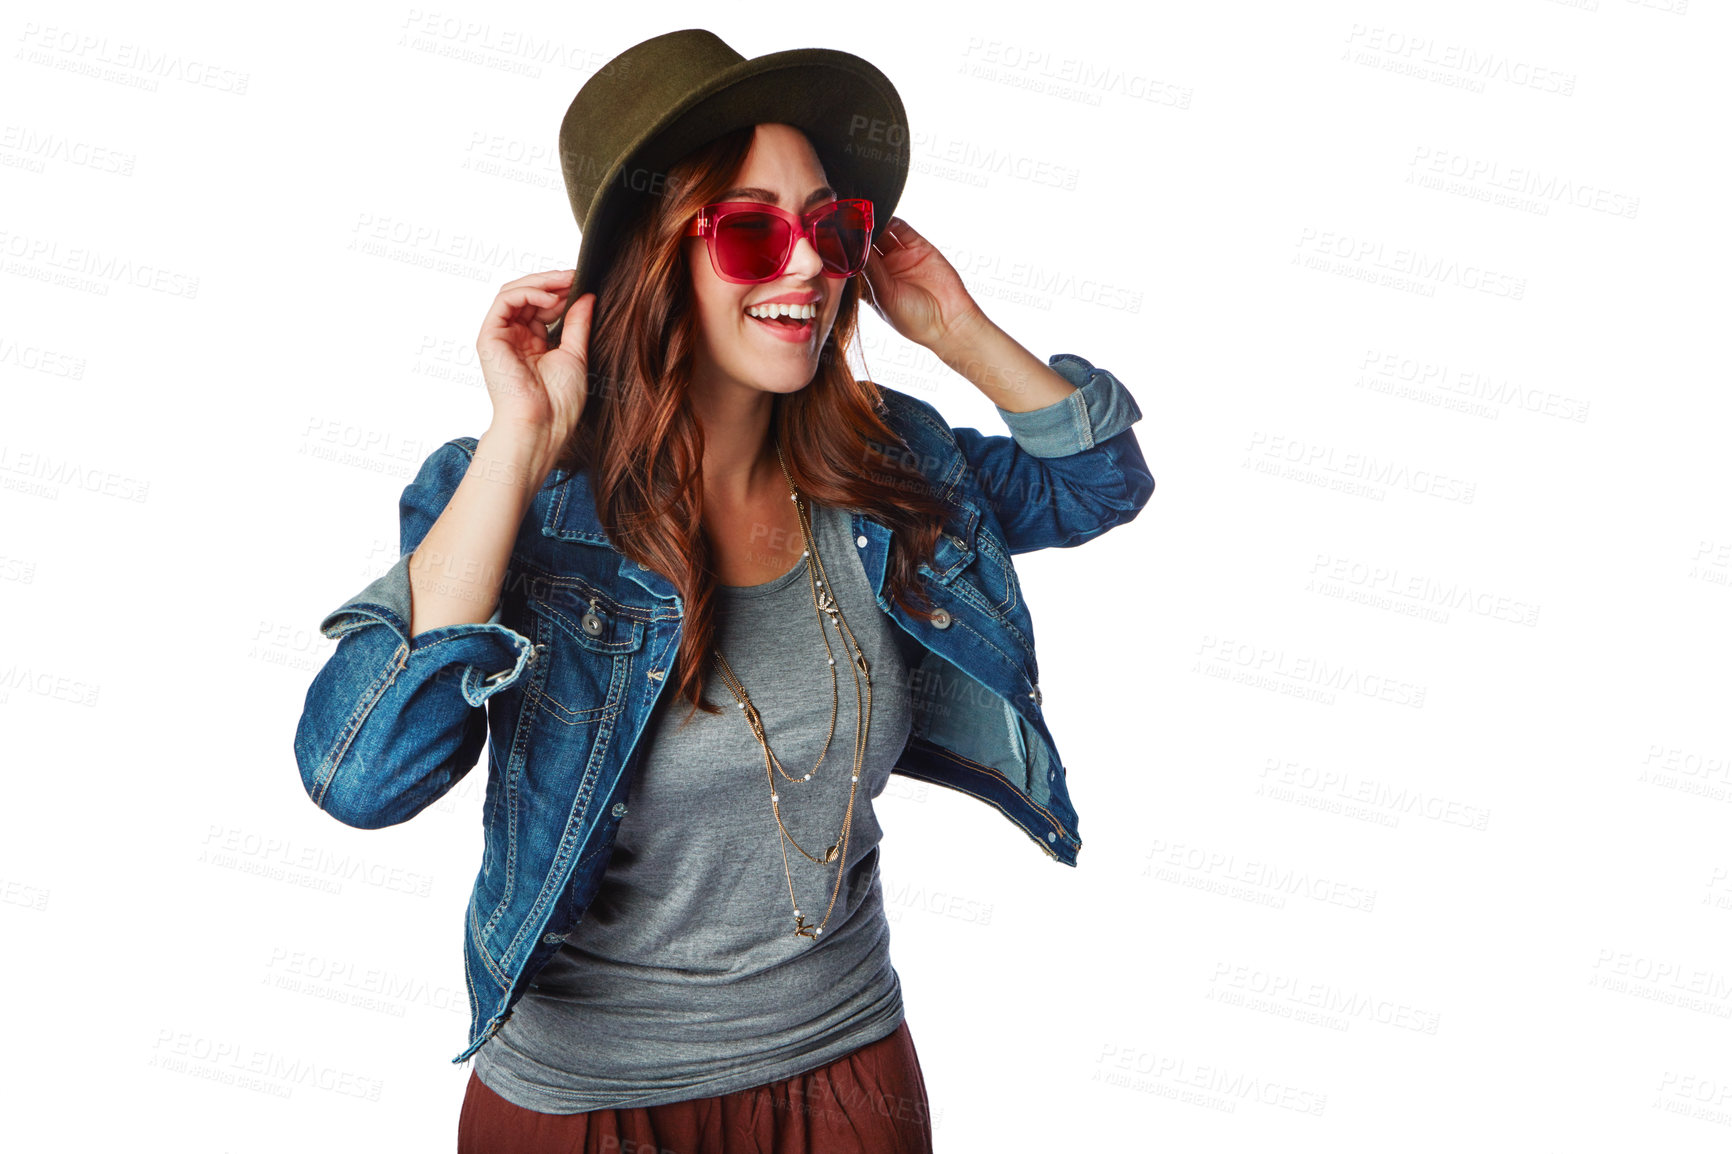 Buy stock photo Thinking, fashion and girl youth happy with trendy style and sunglasses with smile for marketing. Happiness, gen z and young fashionista model isolated on white background for advertising mockup.

